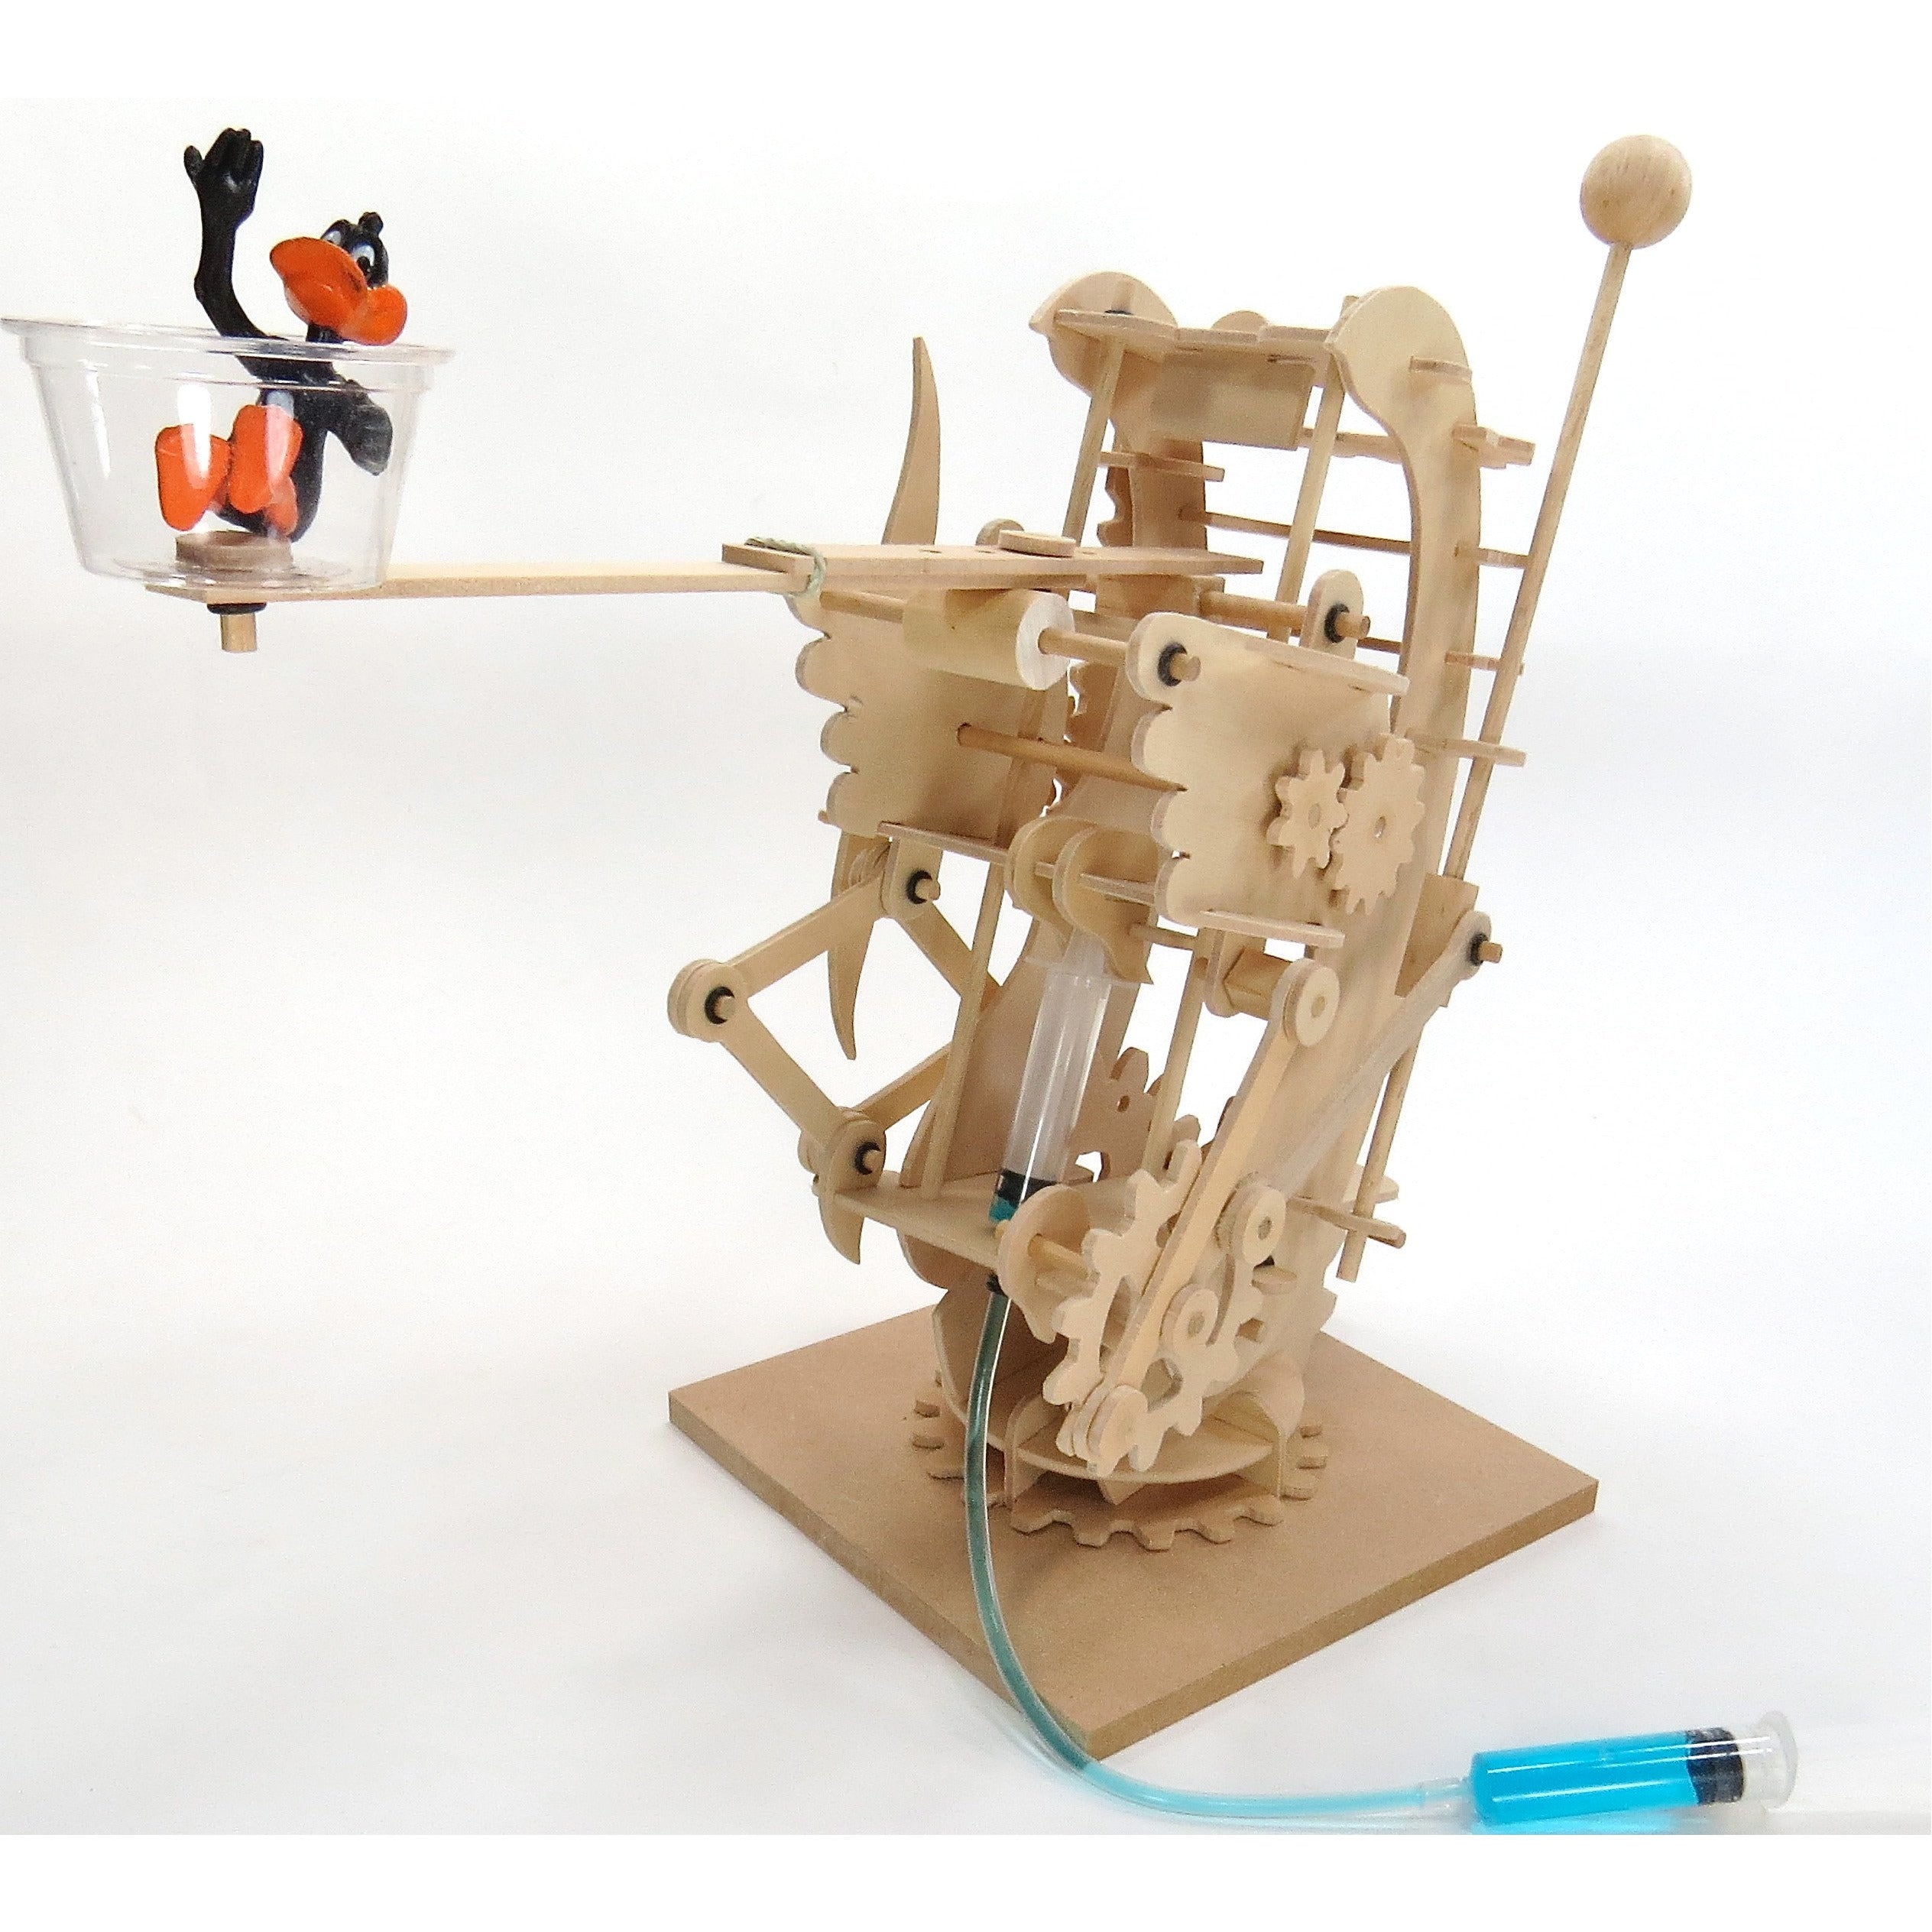 Pathfinders Hydraulic Gearbot